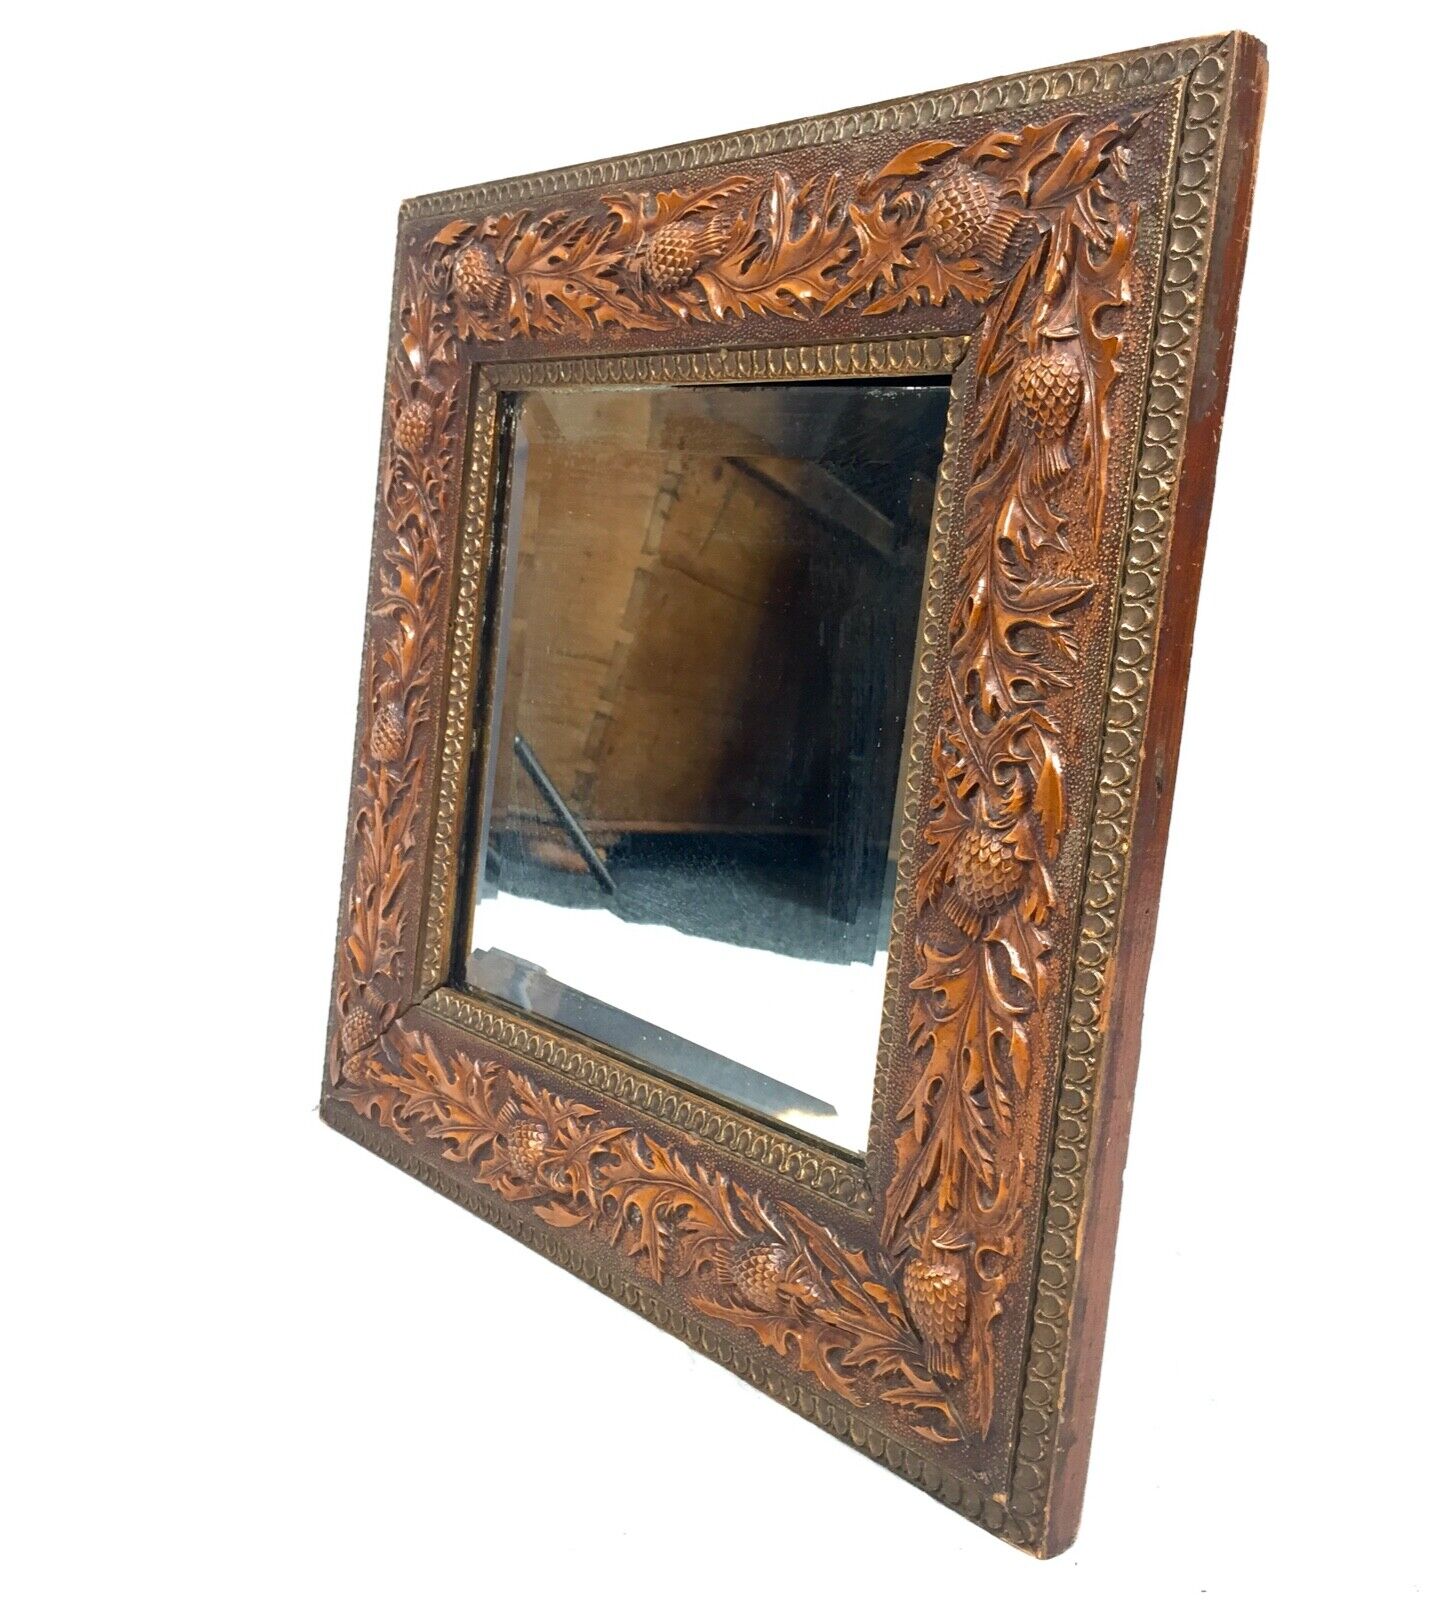 Antique Carved Wall Mirror / Wall Hanging / Left Foliage / c.1920